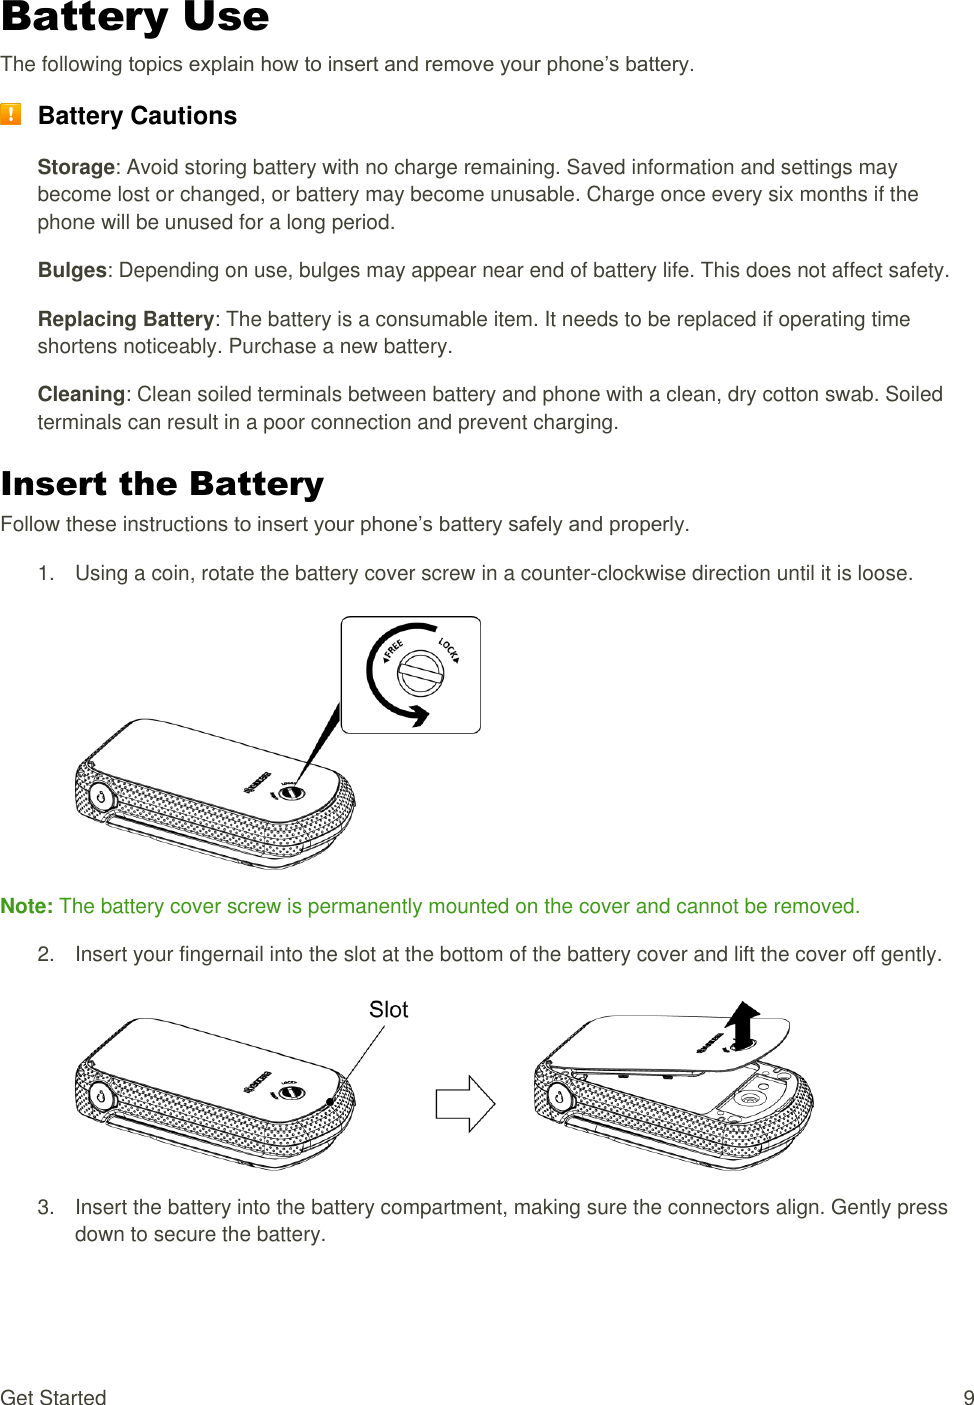  Get Started  9 Battery Use The following topics explain how to insert and remove your phone’s battery.  Battery Cautions Storage: Avoid storing battery with no charge remaining. Saved information and settings may become lost or changed, or battery may become unusable. Charge once every six months if the phone will be unused for a long period. Bulges: Depending on use, bulges may appear near end of battery life. This does not affect safety. Replacing Battery: The battery is a consumable item. It needs to be replaced if operating time shortens noticeably. Purchase a new battery. Cleaning: Clean soiled terminals between battery and phone with a clean, dry cotton swab. Soiled terminals can result in a poor connection and prevent charging. Insert the Battery Follow these instructions to insert your phone’s battery safely and properly. 1.  Using a coin, rotate the battery cover screw in a counter-clockwise direction until it is loose.   Note: The battery cover screw is permanently mounted on the cover and cannot be removed. 2.  Insert your fingernail into the slot at the bottom of the battery cover and lift the cover off gently.   3.  Insert the battery into the battery compartment, making sure the connectors align. Gently press down to secure the battery. 